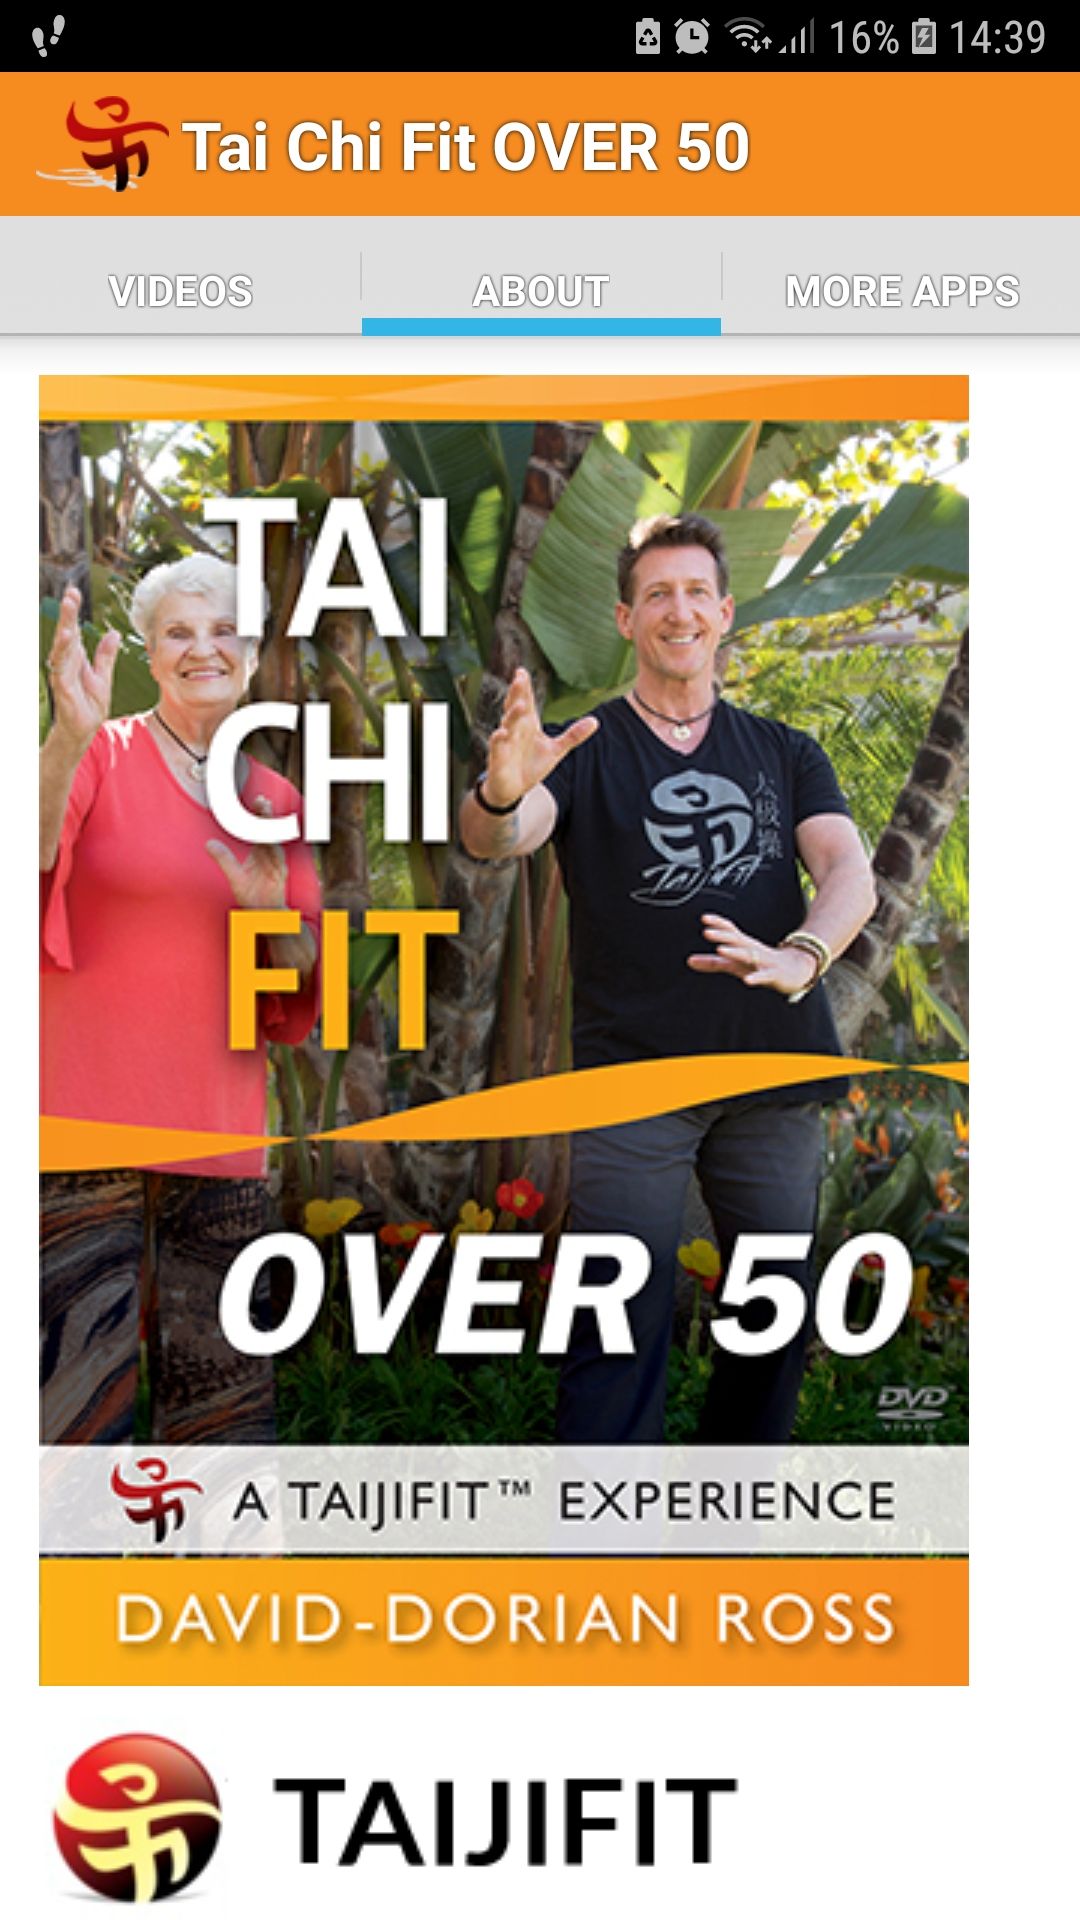 Tai Chi Fit OVER 50 mobile exercise app about